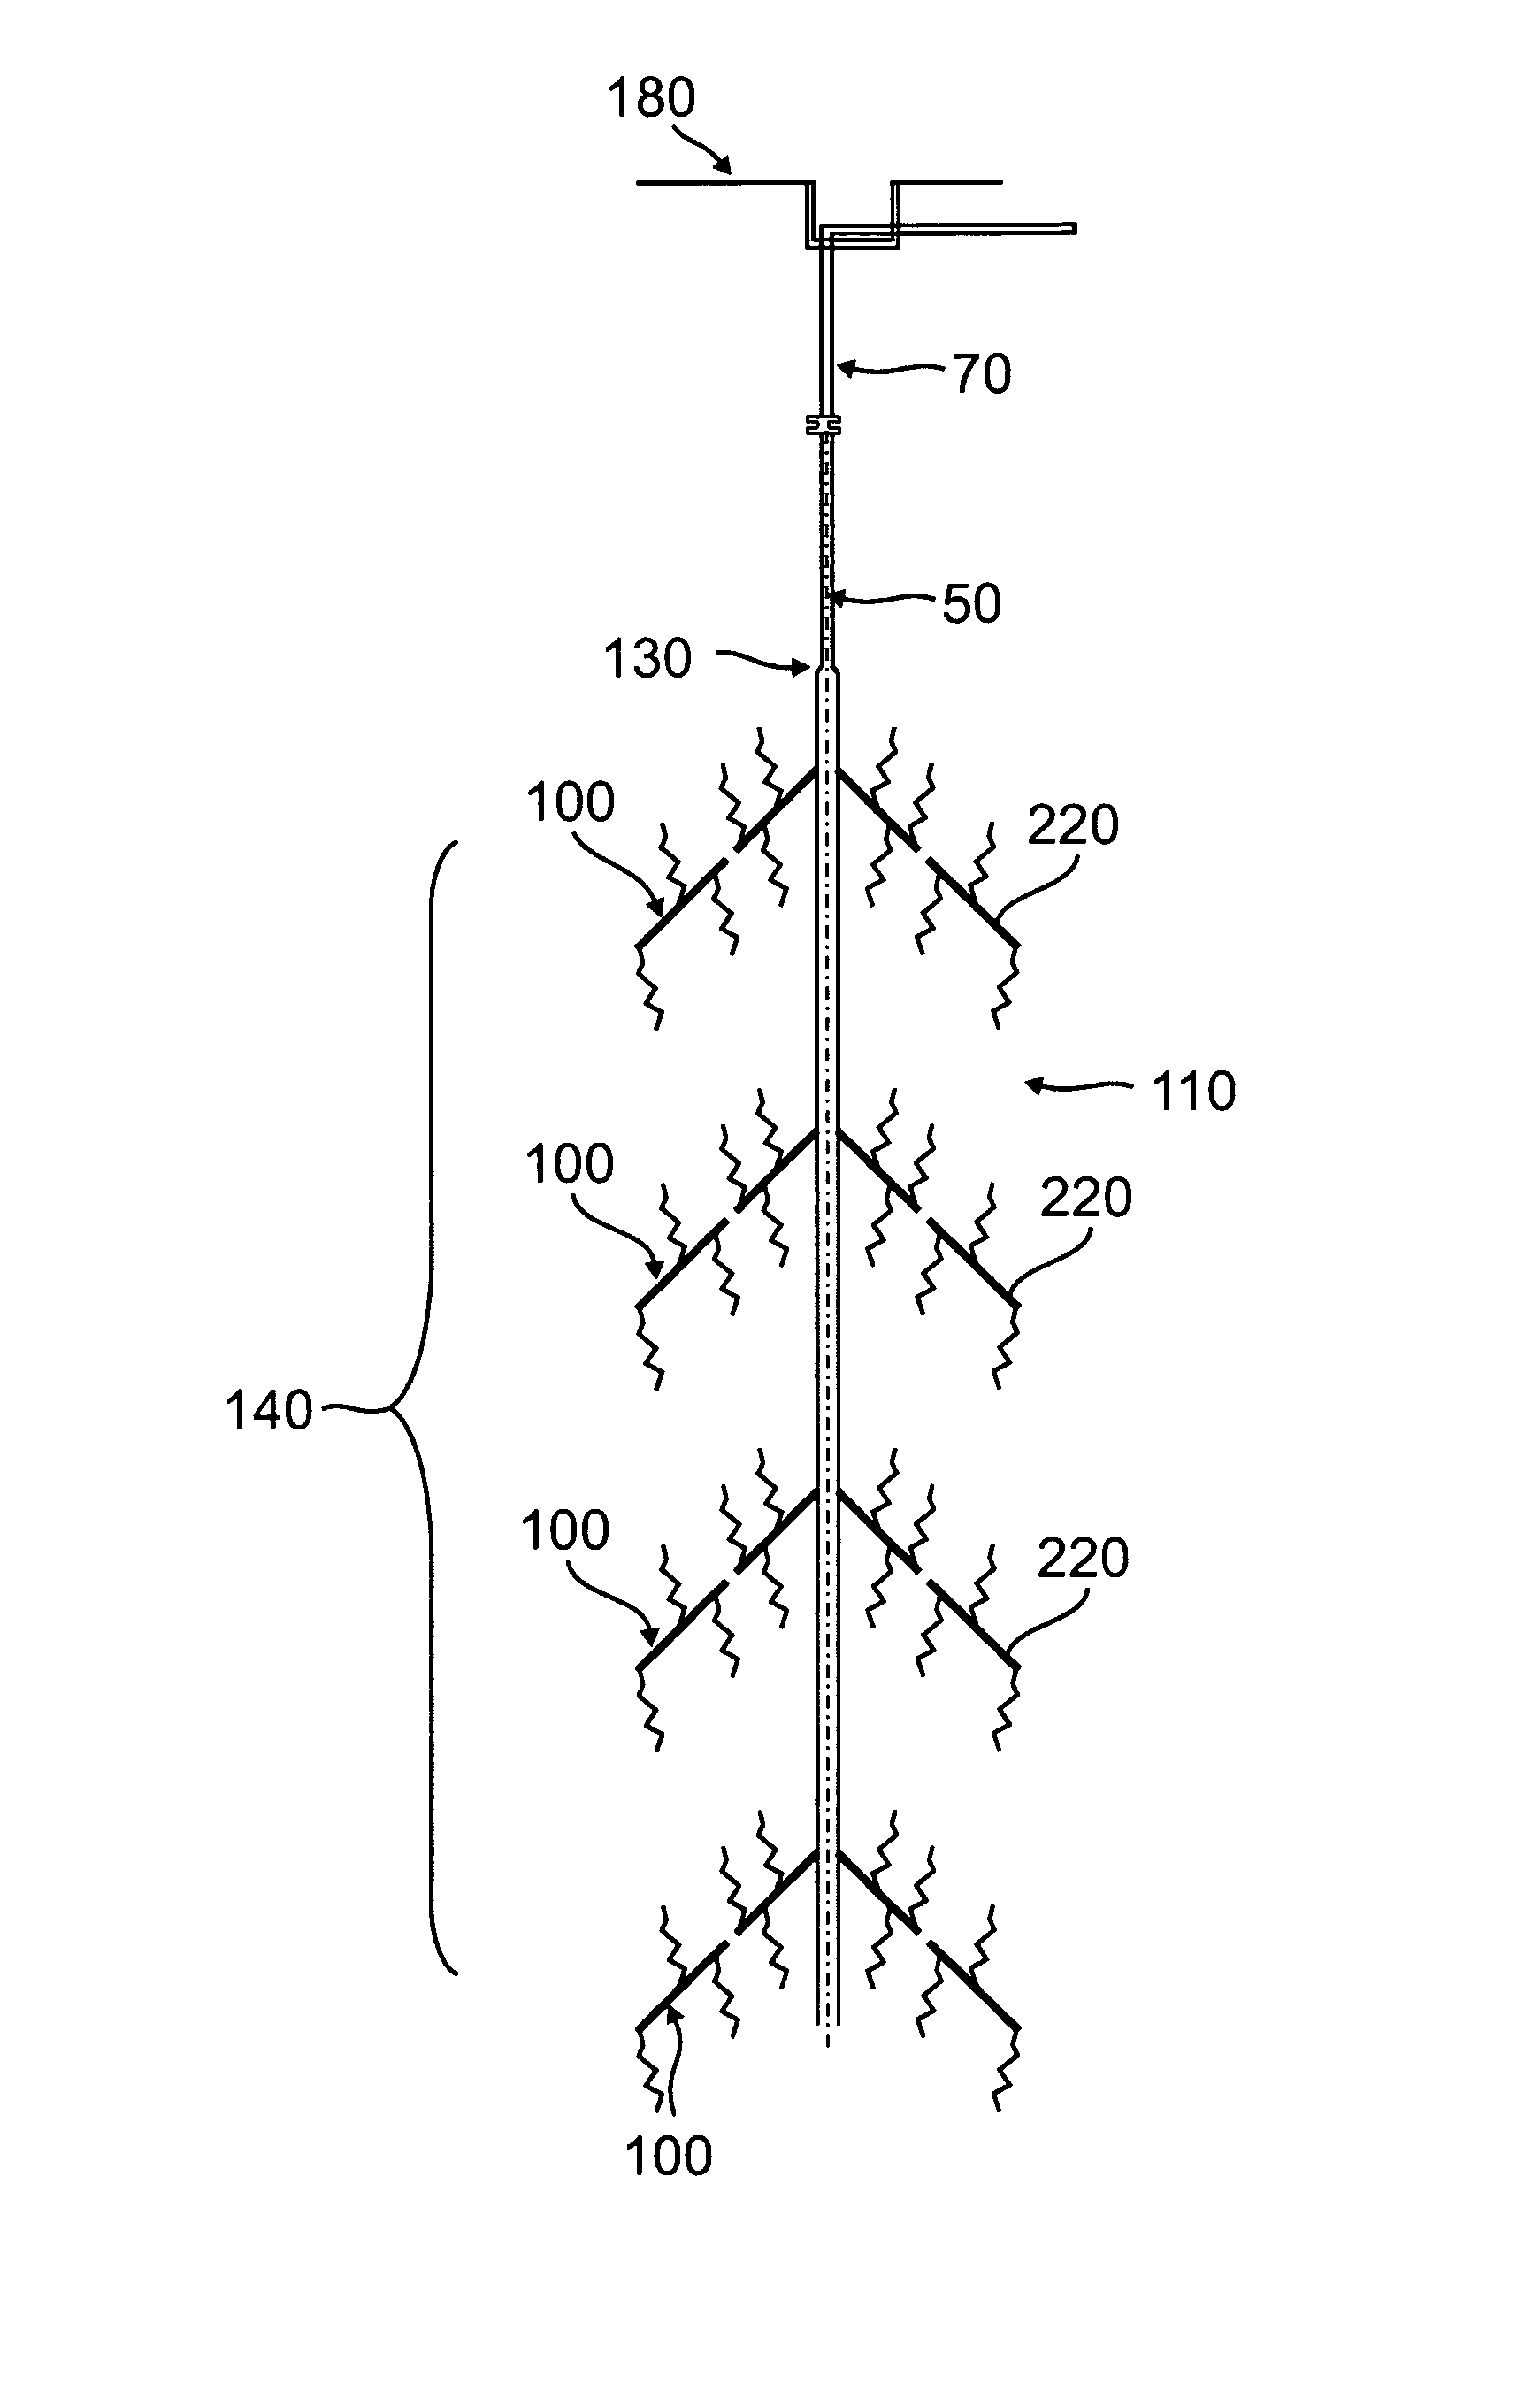 System and method of capturing geothermal heat from within a drilled well to generate electricity